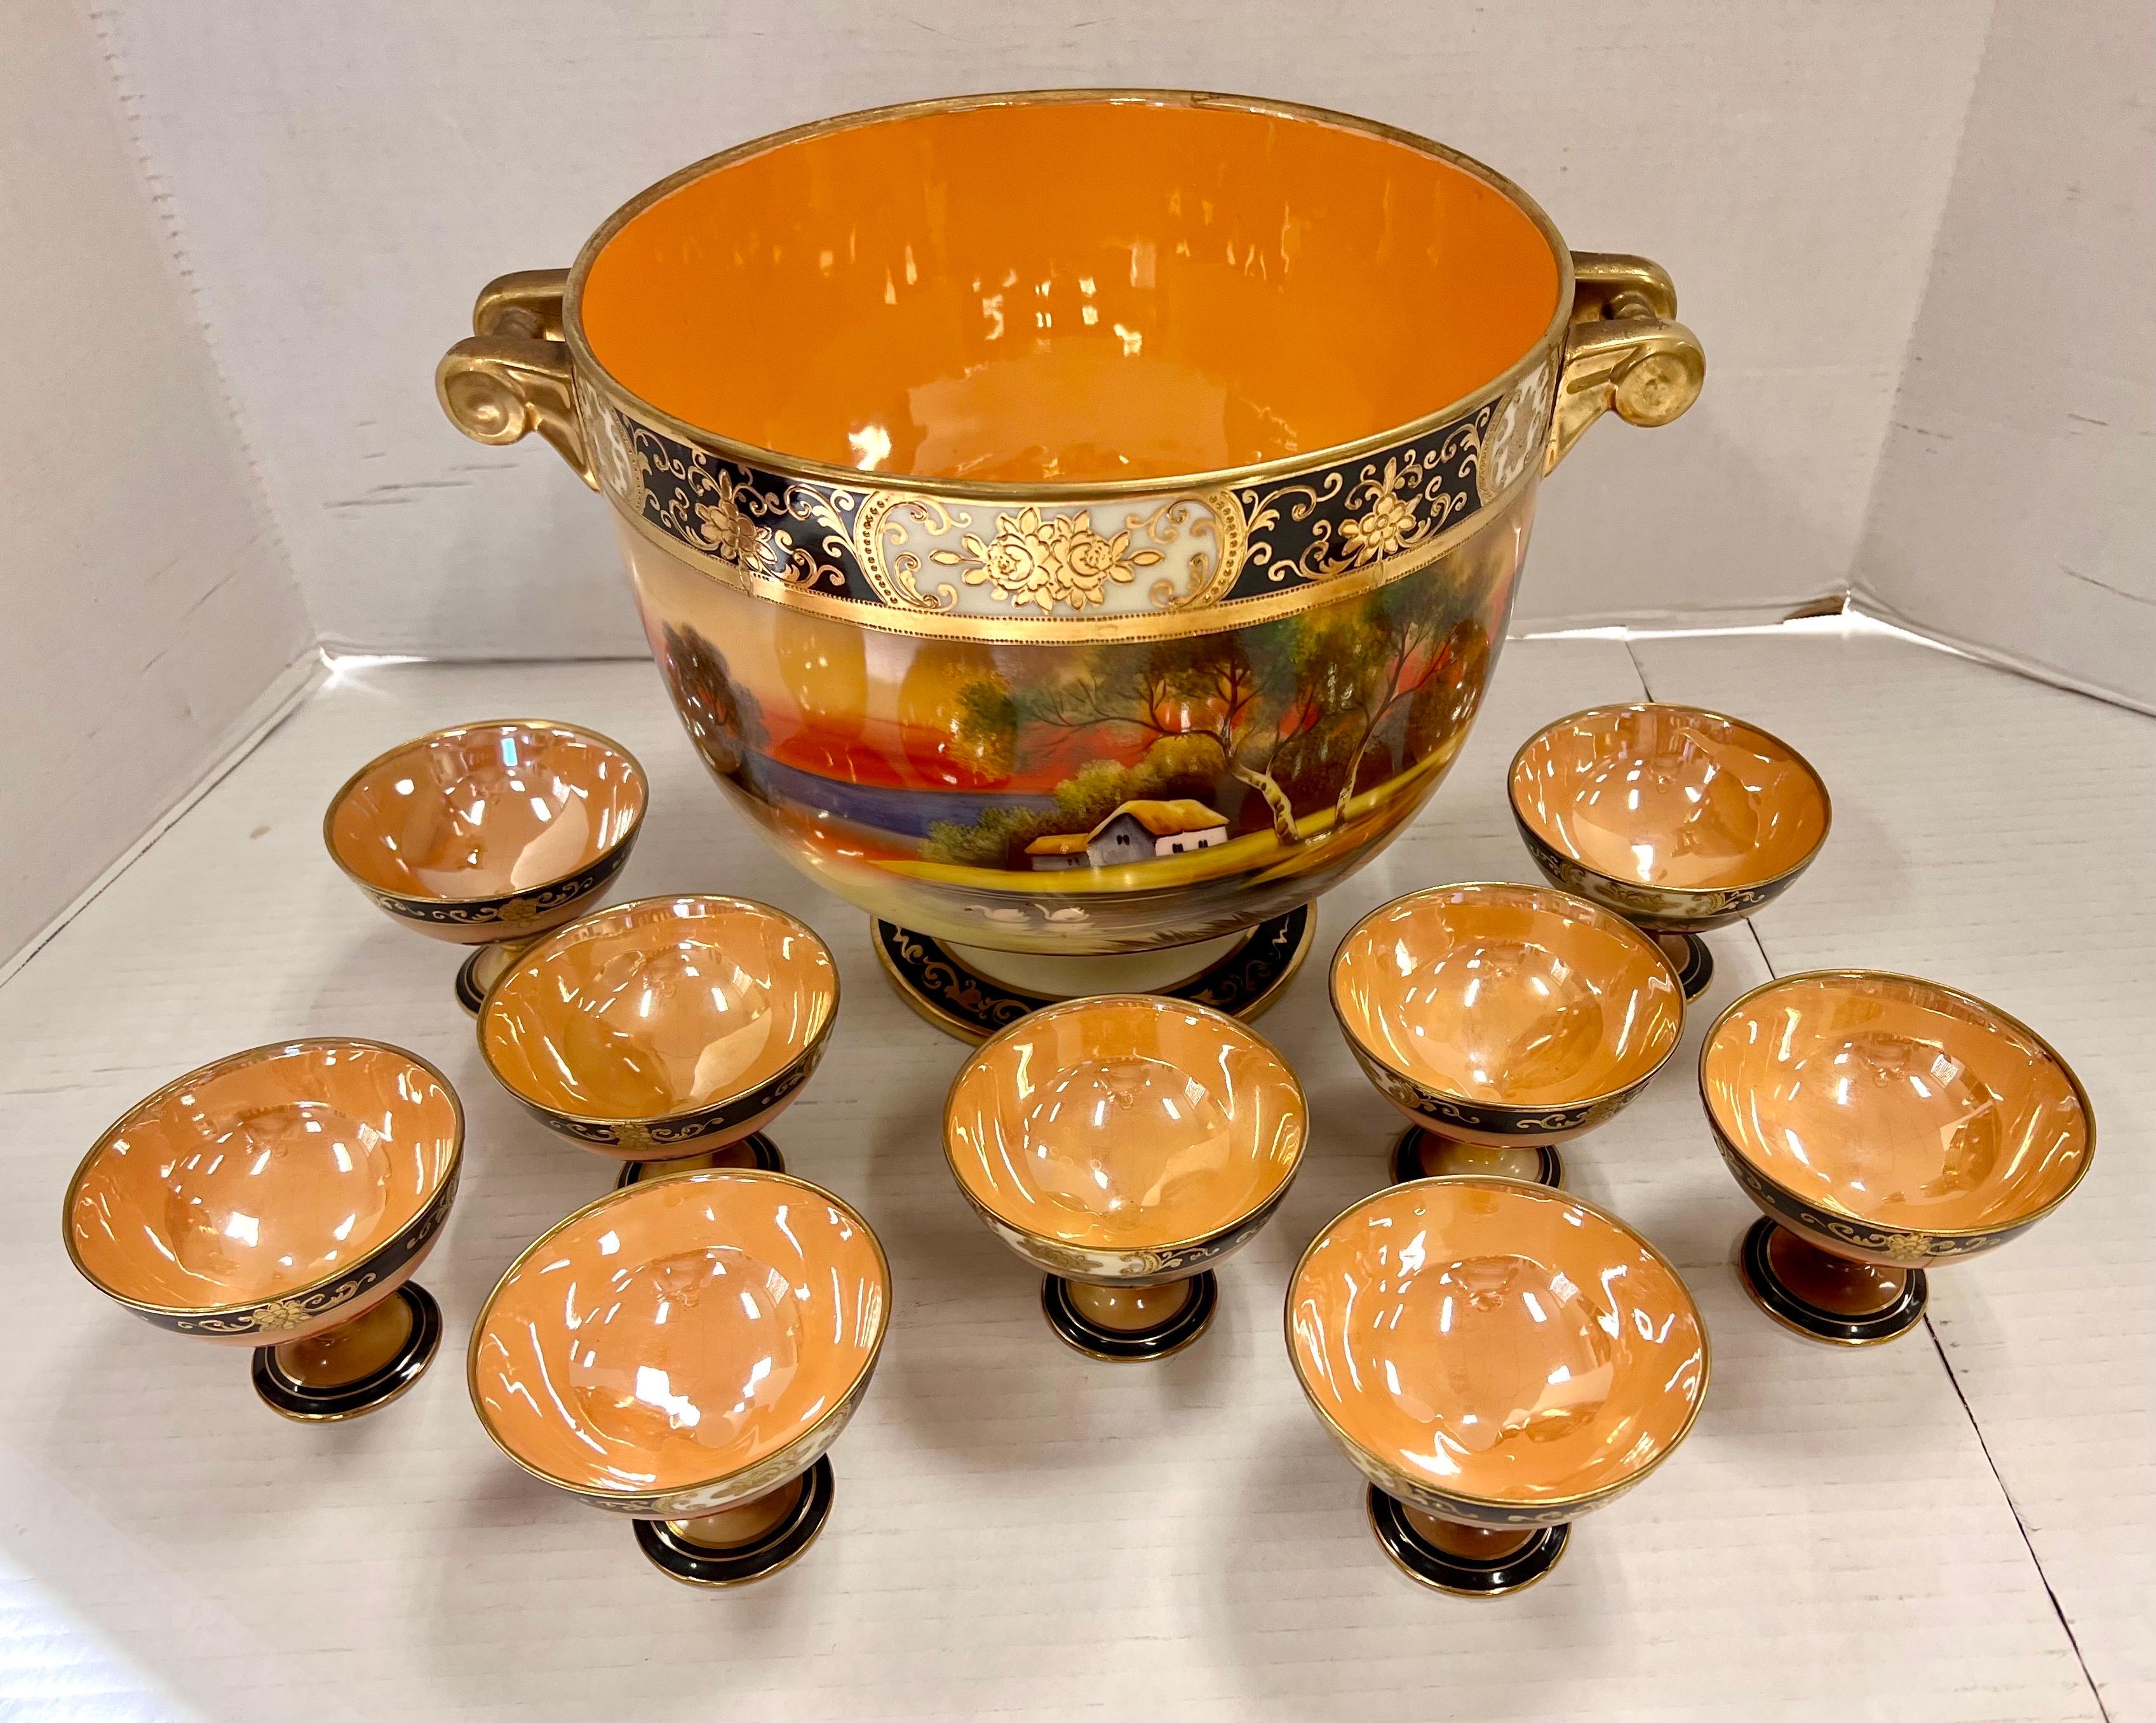 Colorful and large footed pedestal centerpiece punch bowl with 9 matching cups.  Stunning hand painted scenery of sunset on a lake cottage scene complete with swans and trees. Features luster gold interior with cobalt blue and gilt accents.  All